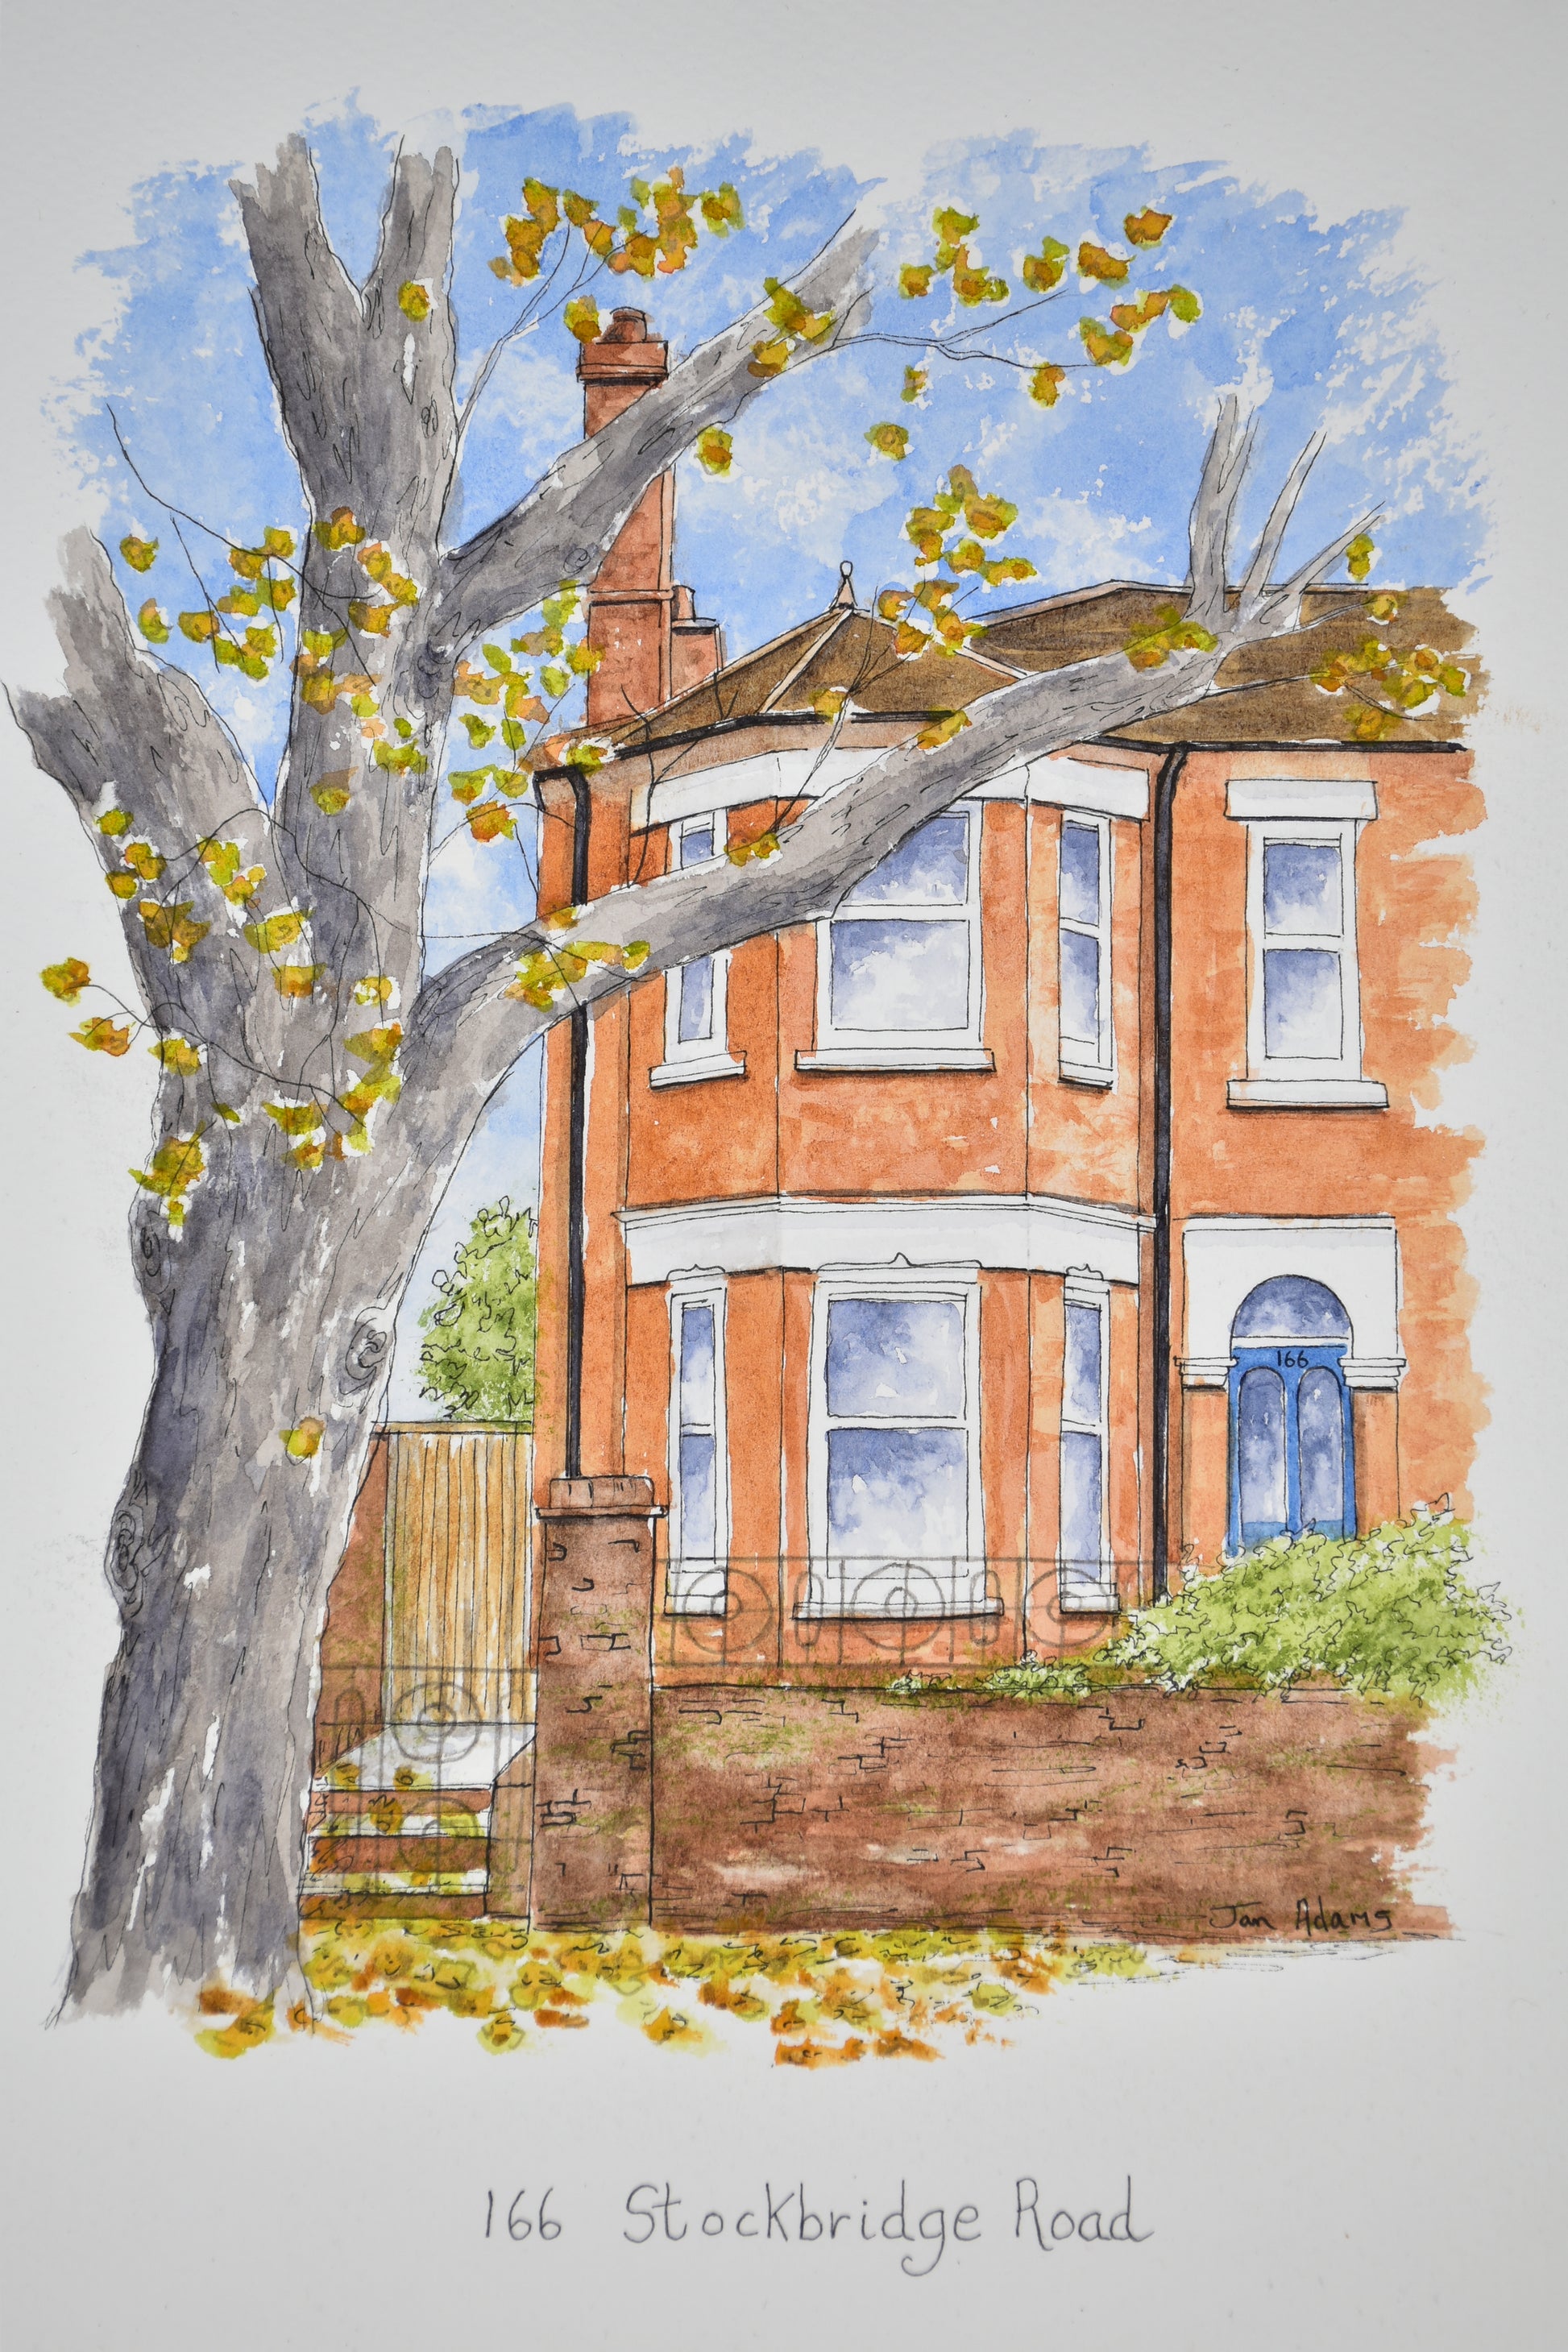 Victorian end of terrace house painting with large tree outside, autumn leaves on ground